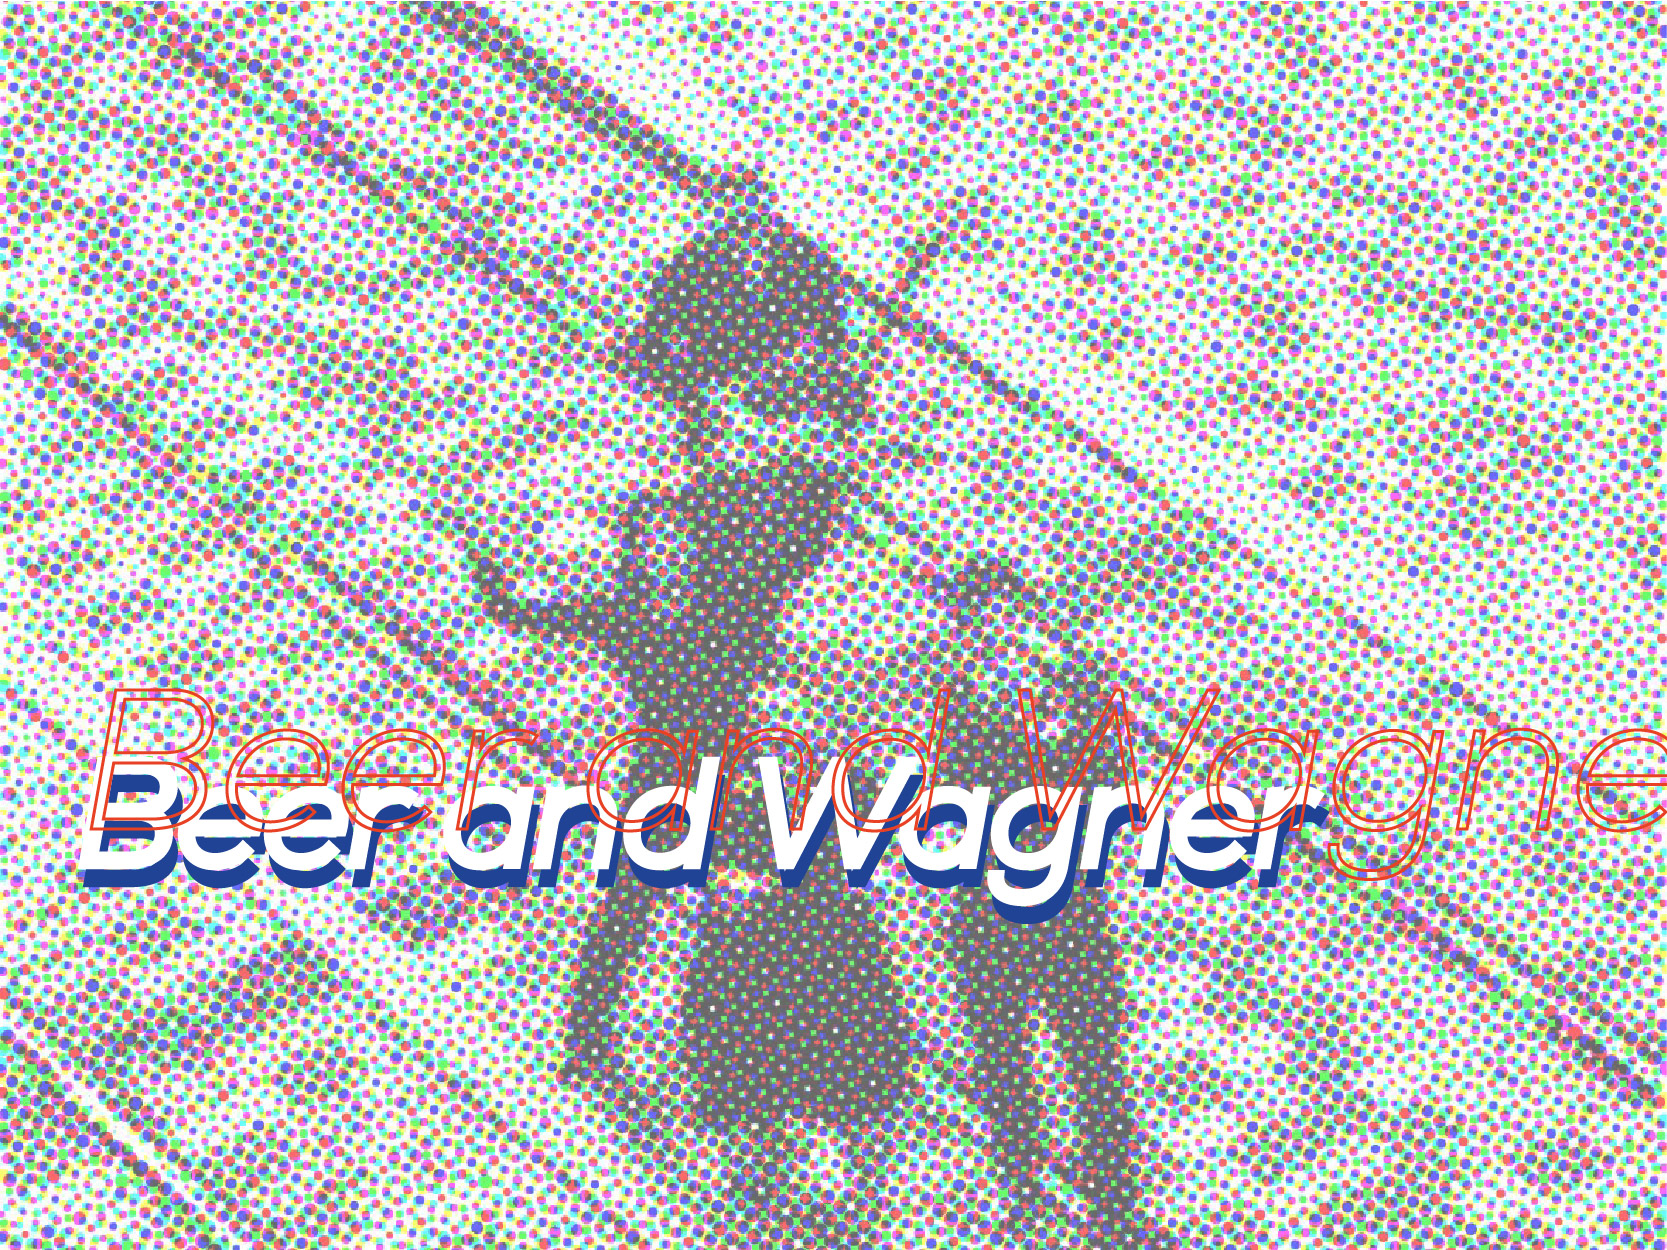 Beer and Wagner